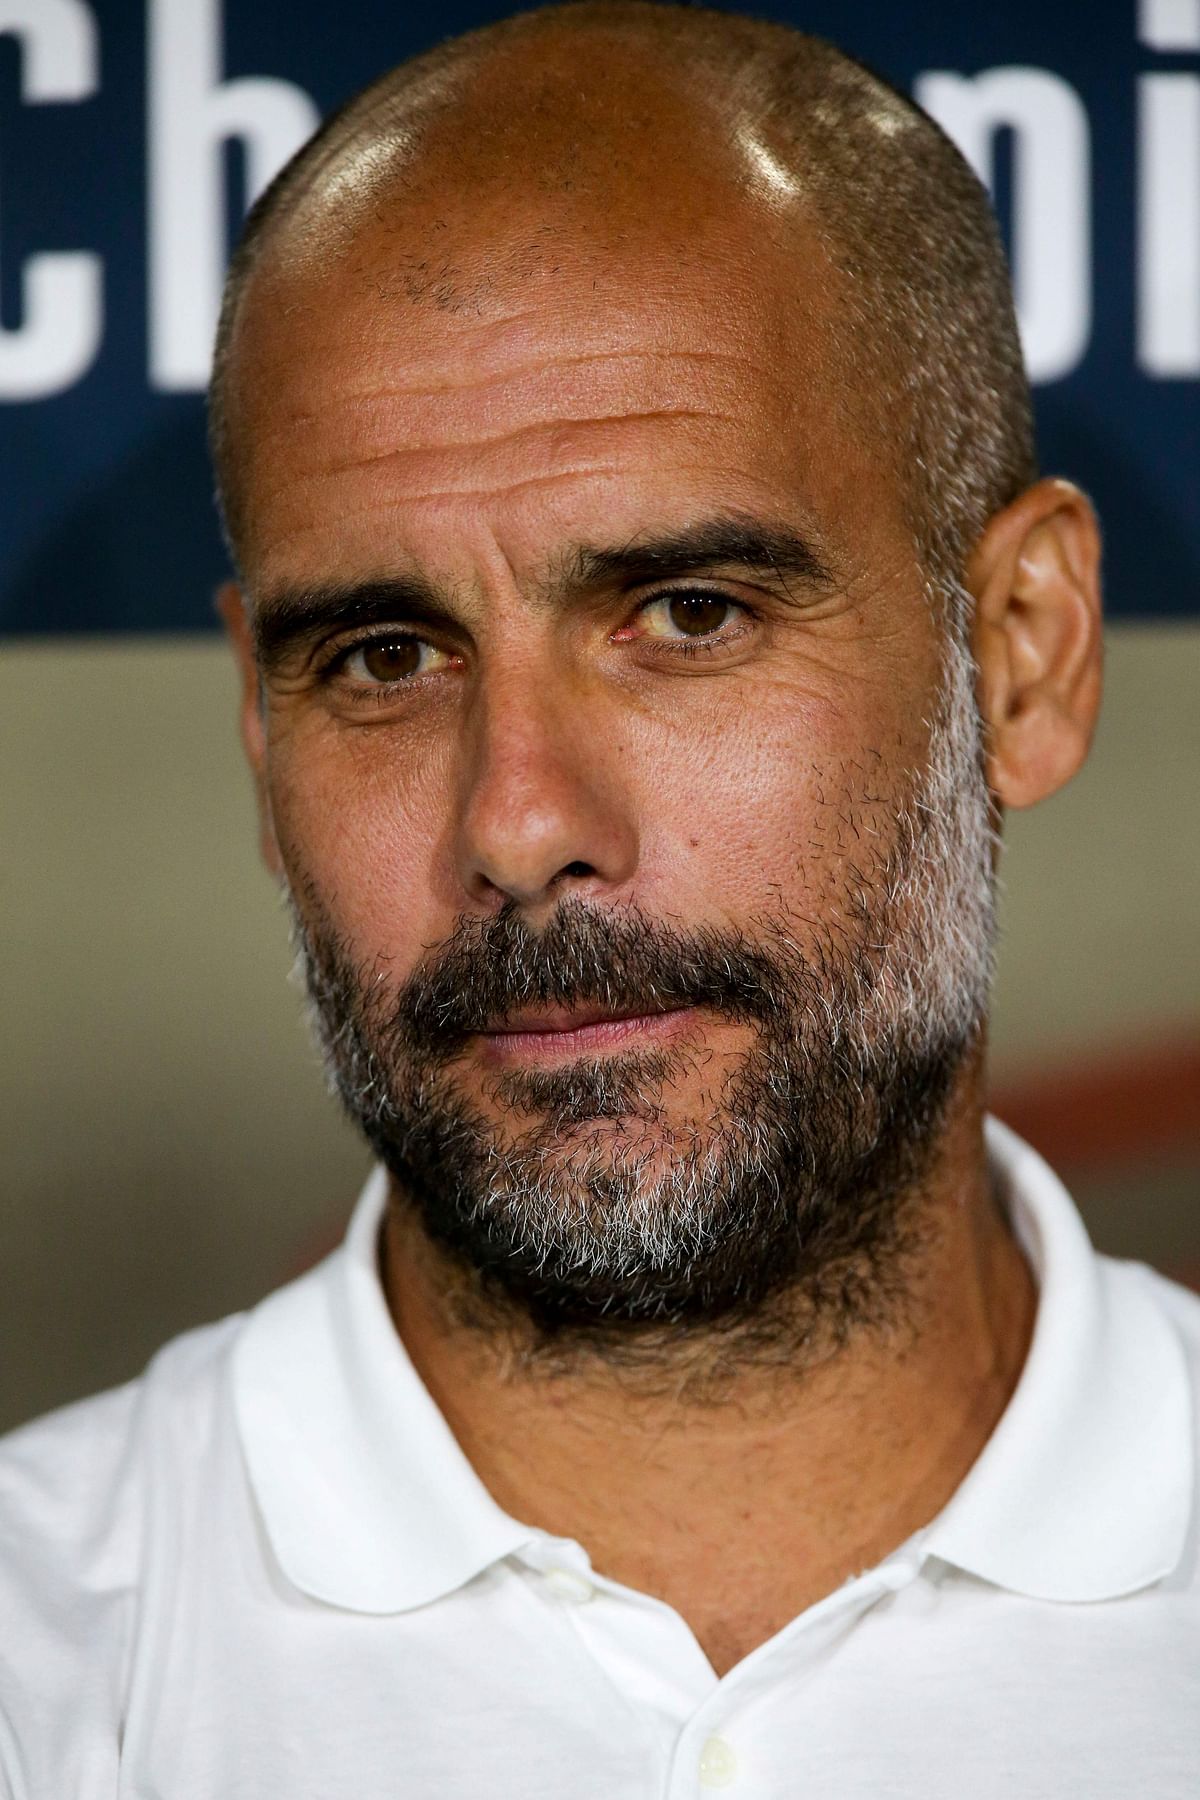 Pep Guardiola will be keen to win his first major trophy in England. AFP